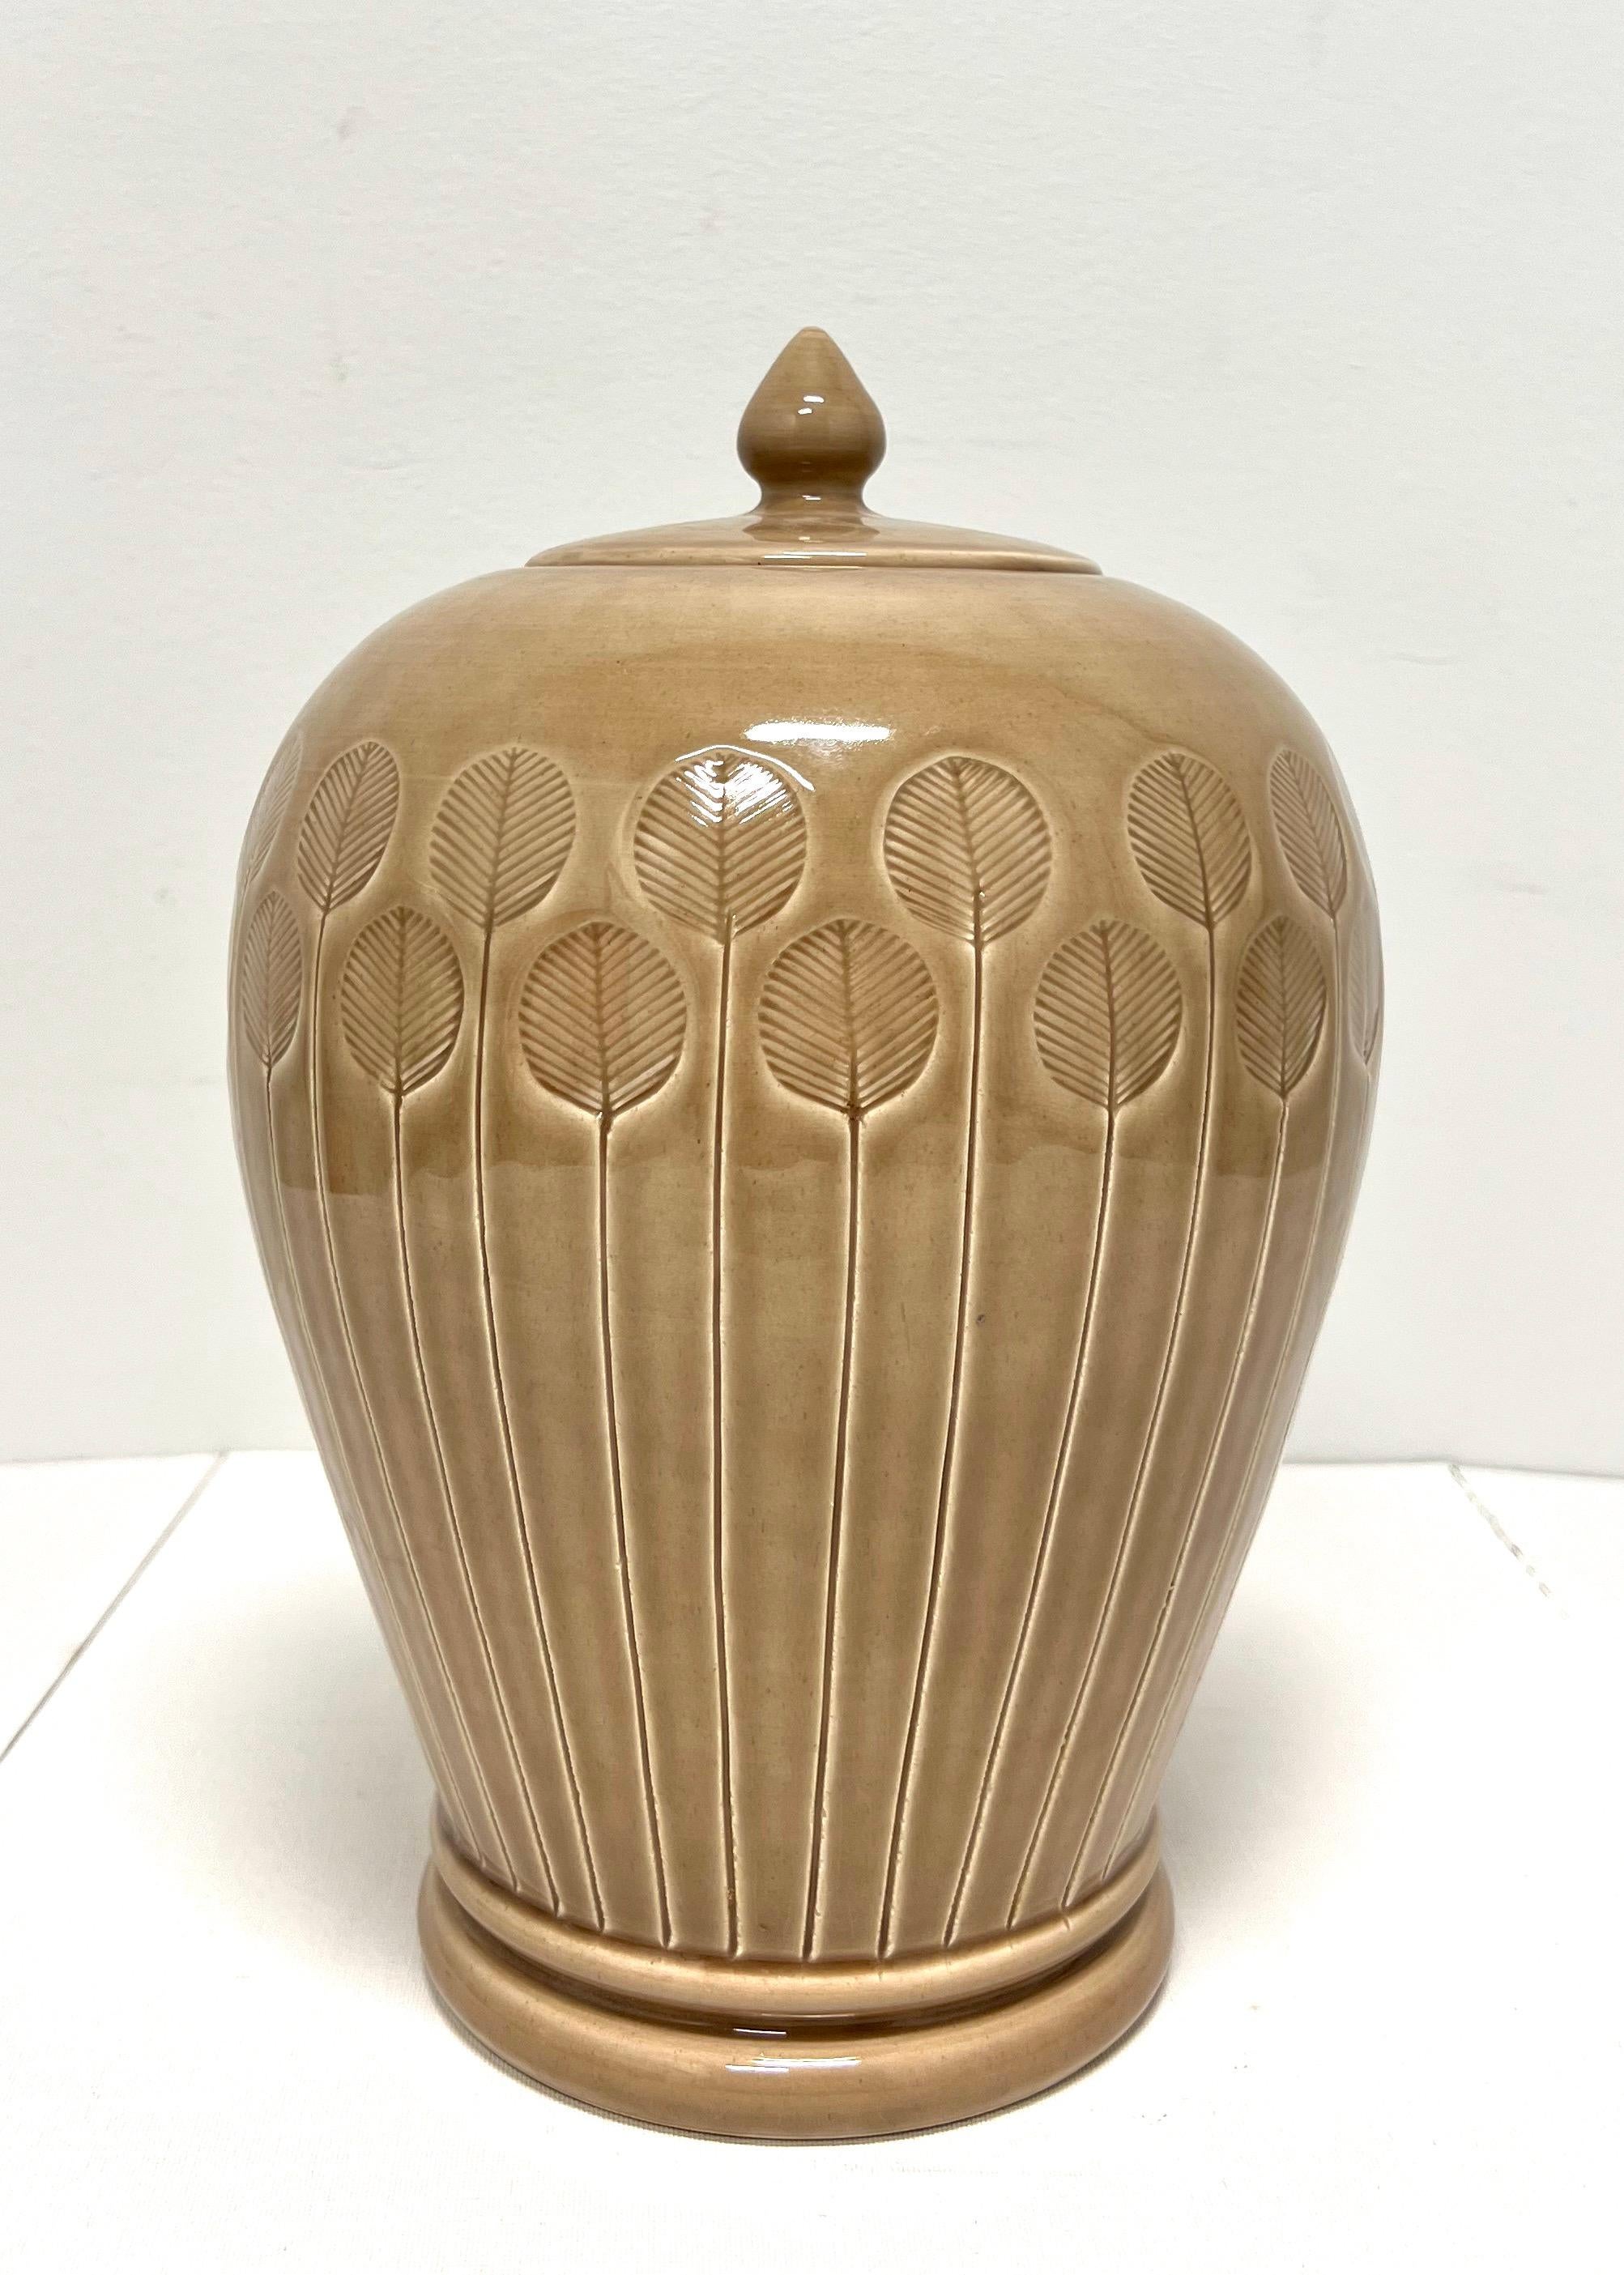 An Abstract Modern style ceramic ginger jar with lid, unbranded. Light brown in color, urn shaped, abstract flower design throughout and a small round handled lid. Likely made in China, circa 1980's.

Measures:  8w 8d 12h, Weighs Approximately: 6